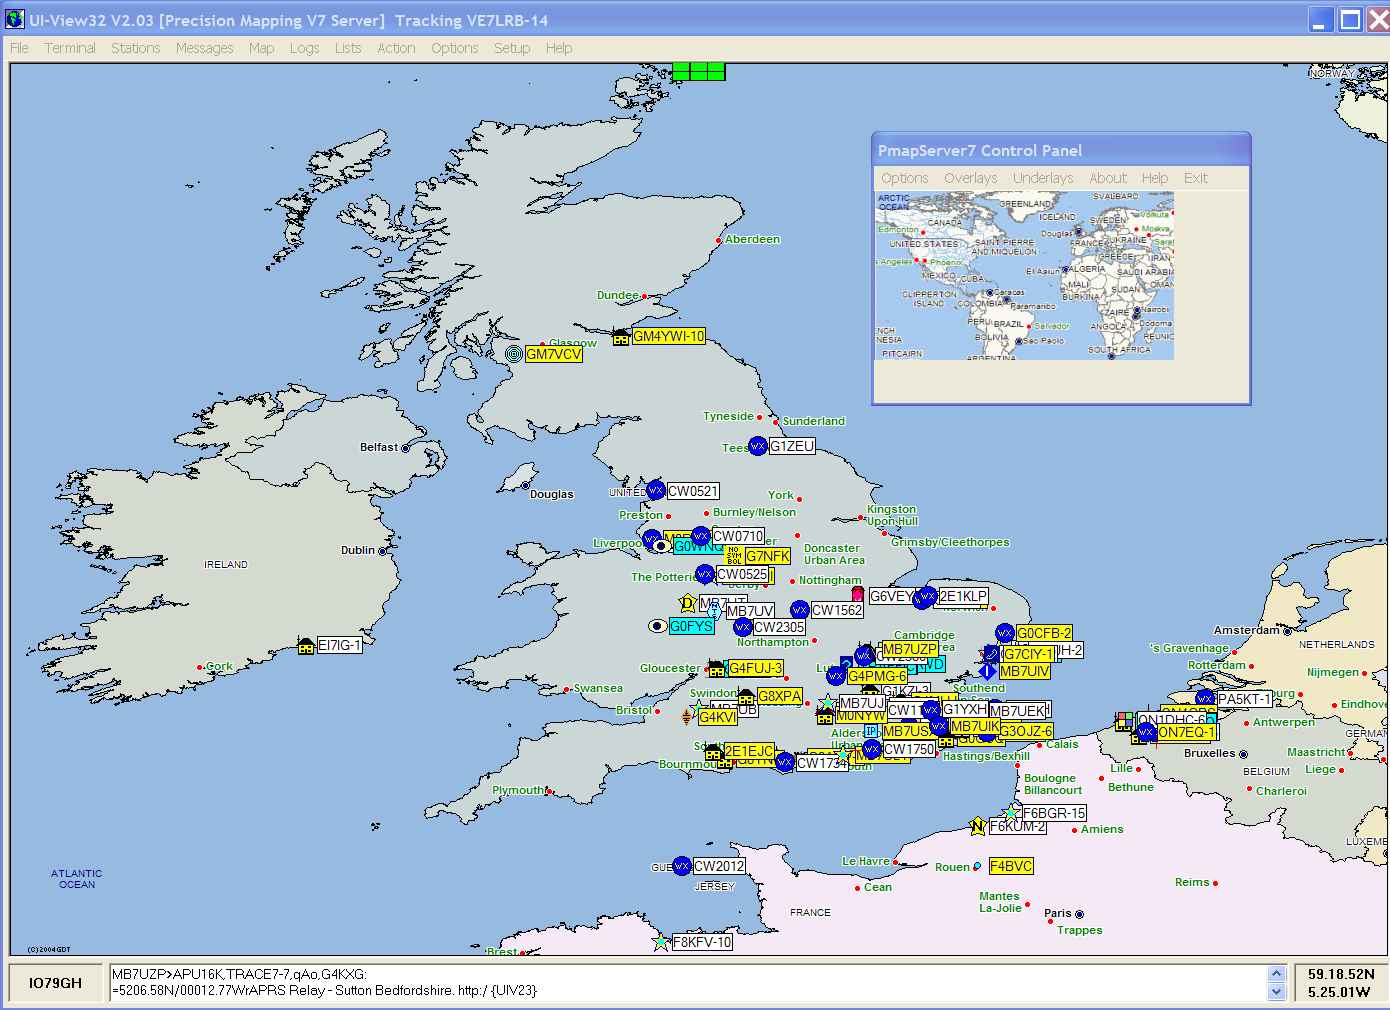 Screenshot of UK in UI-View32 using PMapServer7 and Precision Mapping 7. Click picture to go back.